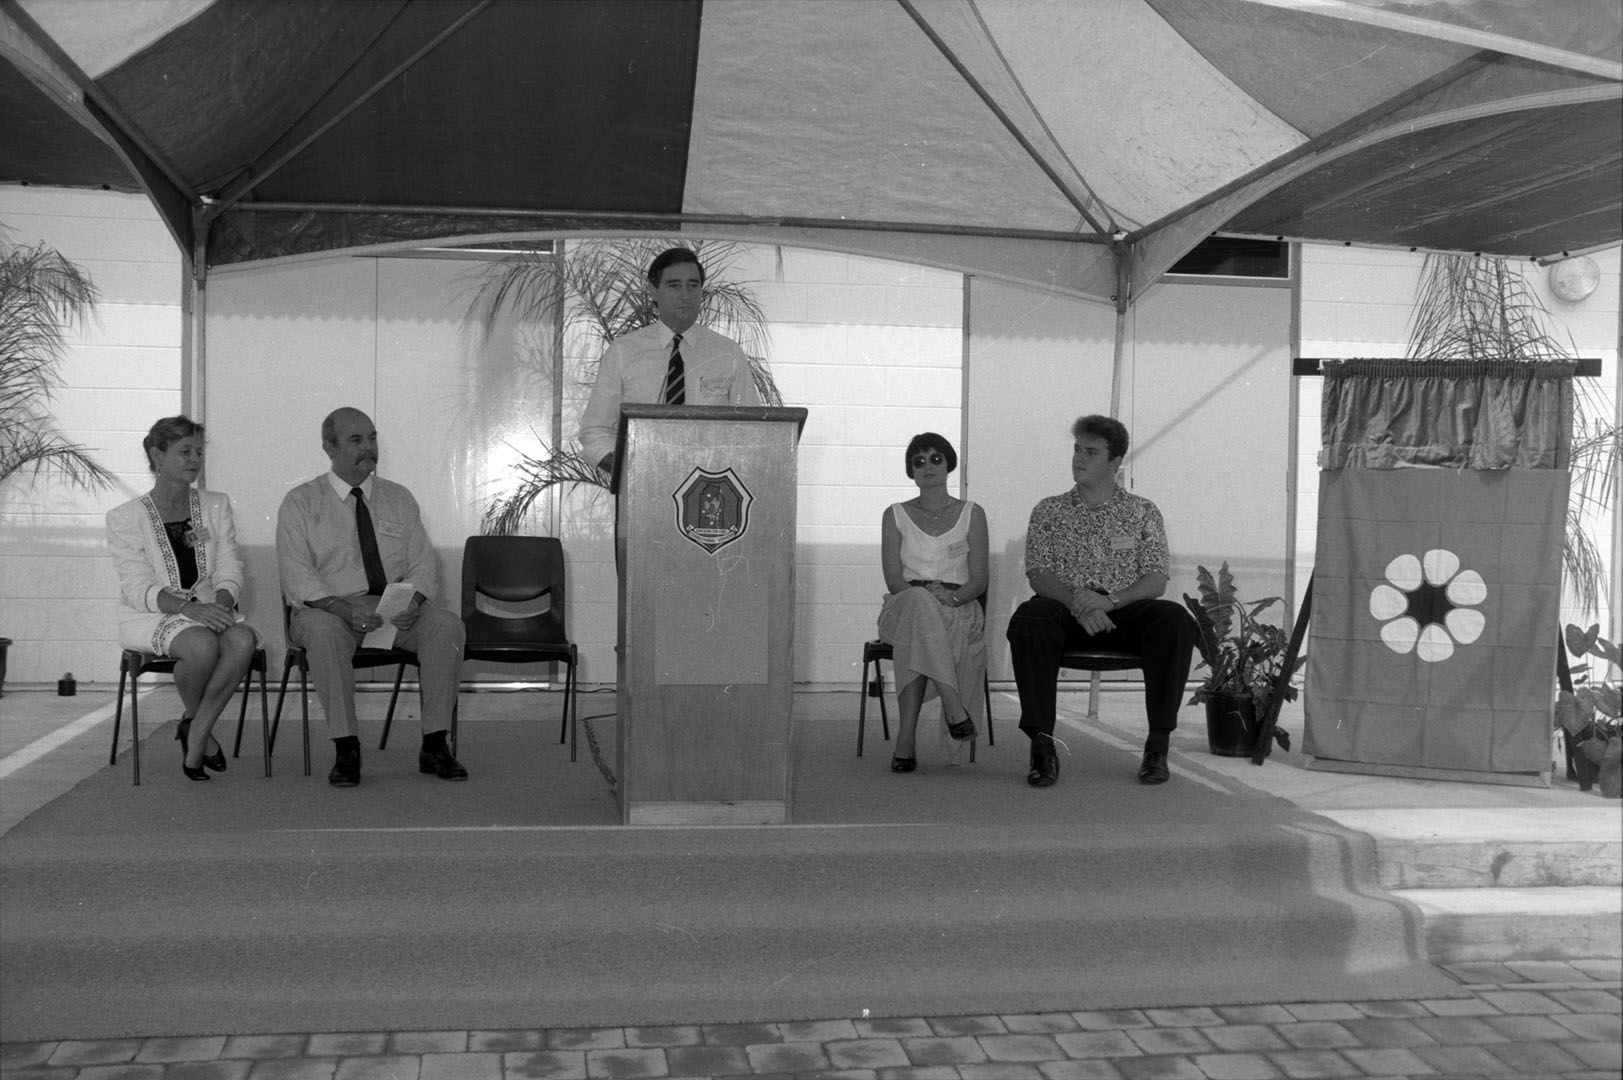 Correctional Services, Opening of Don Dale Centre, 27 November 1991<br>Image courtesy of Library & Archives NT, Department of the Chief Minister, NTRS 3825 P1, Box 11, Envelope 37, Image 5